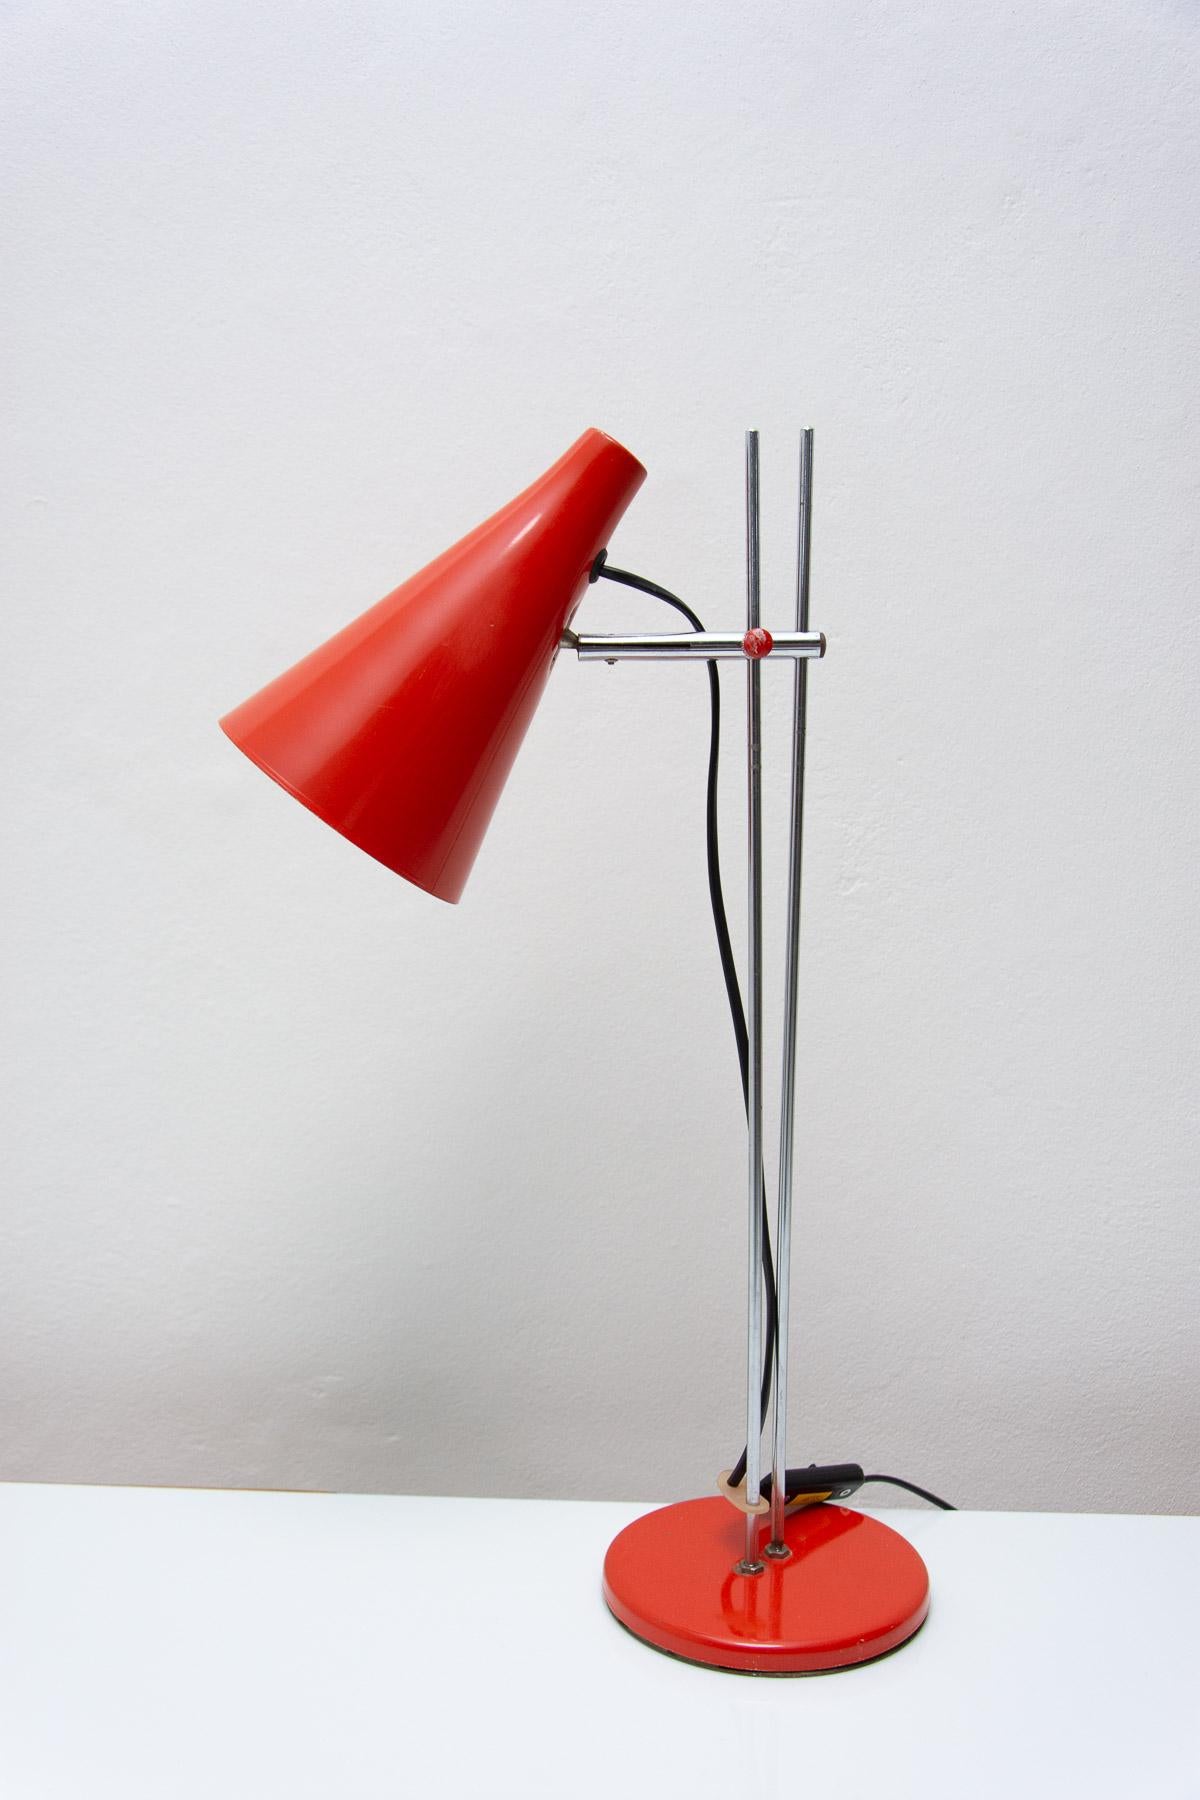 This midcentury table lamp was designed by Josef Hurka for Napako. It features a chrome arched construction to which a red cone-shaped shade is attached. Other Material: aluminum, plastic. Fully functional, newly wired, the lamp is in very good